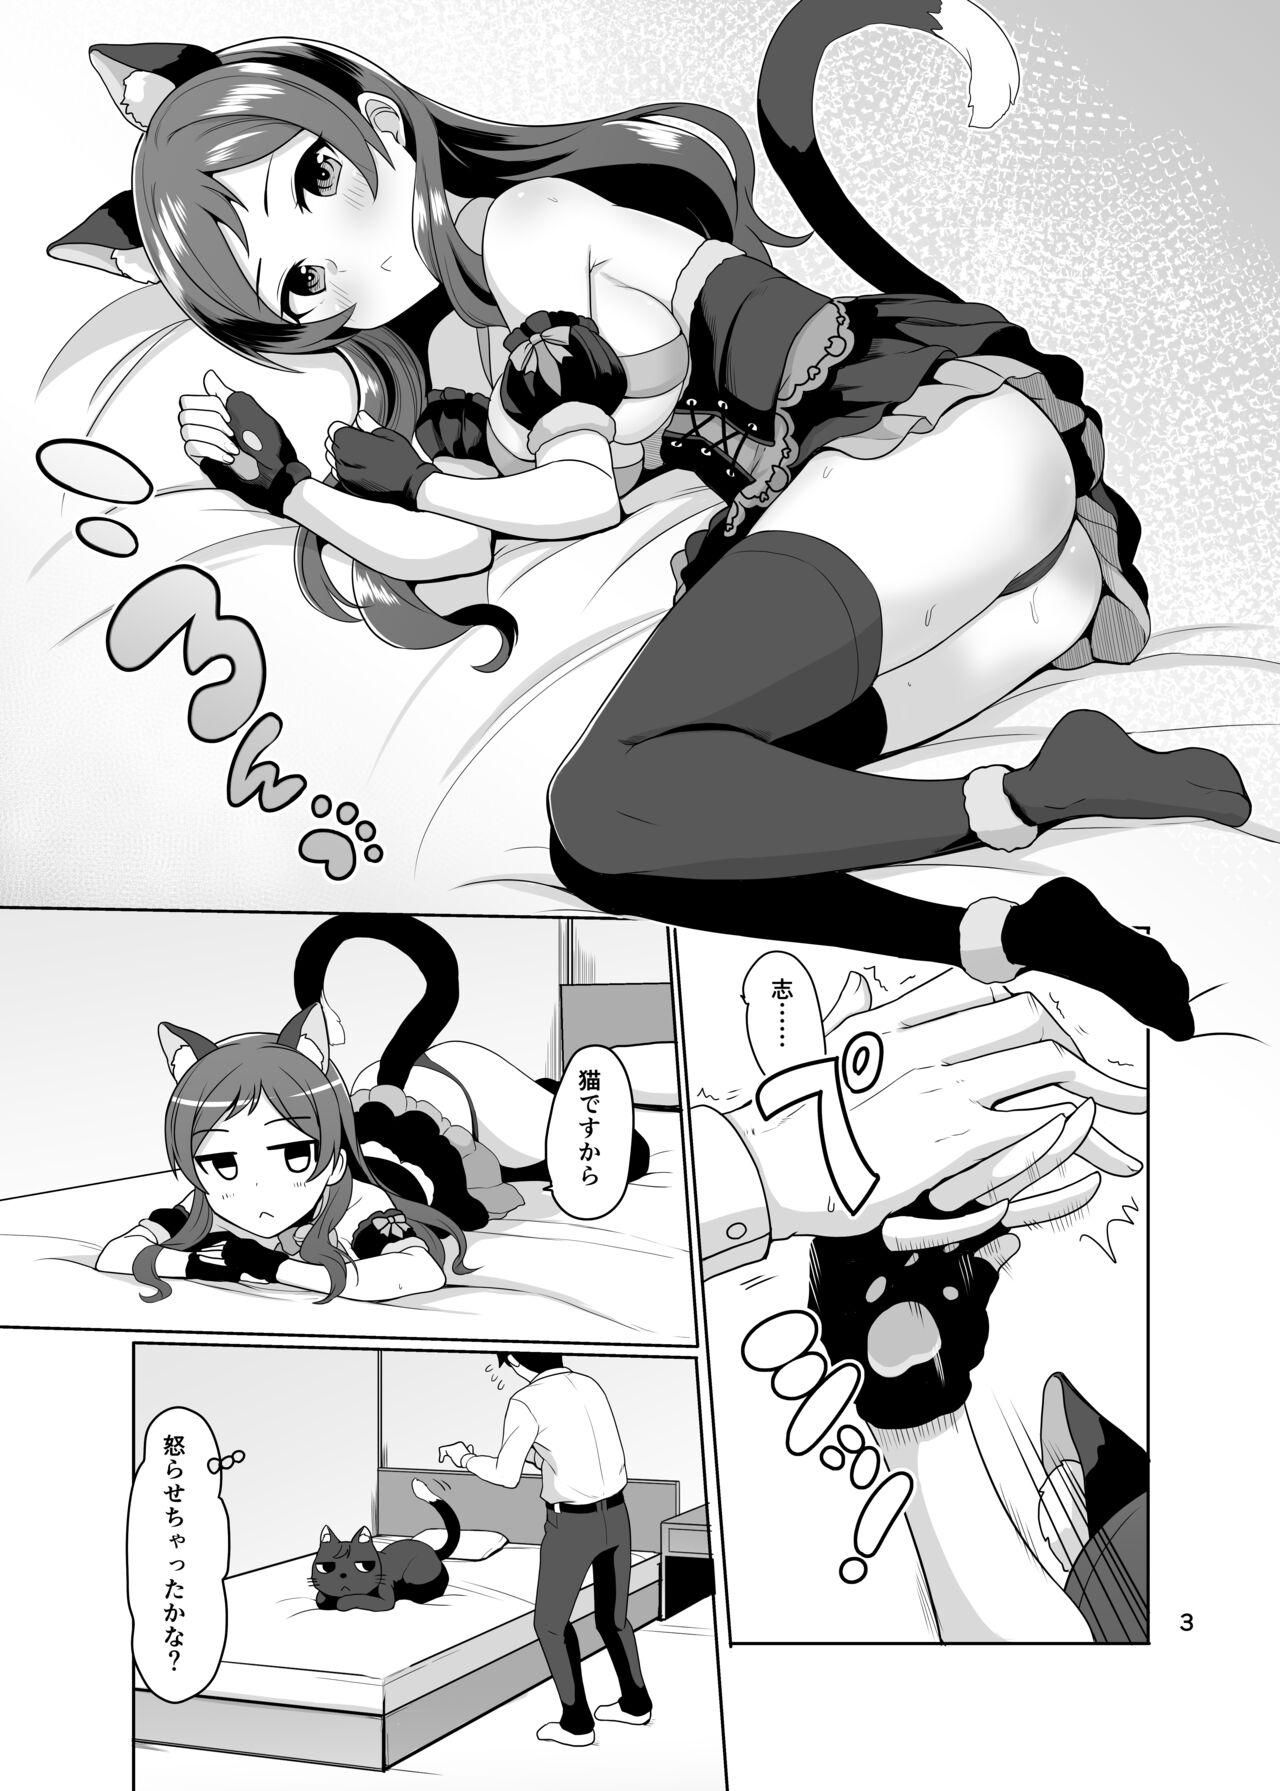 Eating Pussy Ears and Tail - The idolmaster Prostitute - Page 4